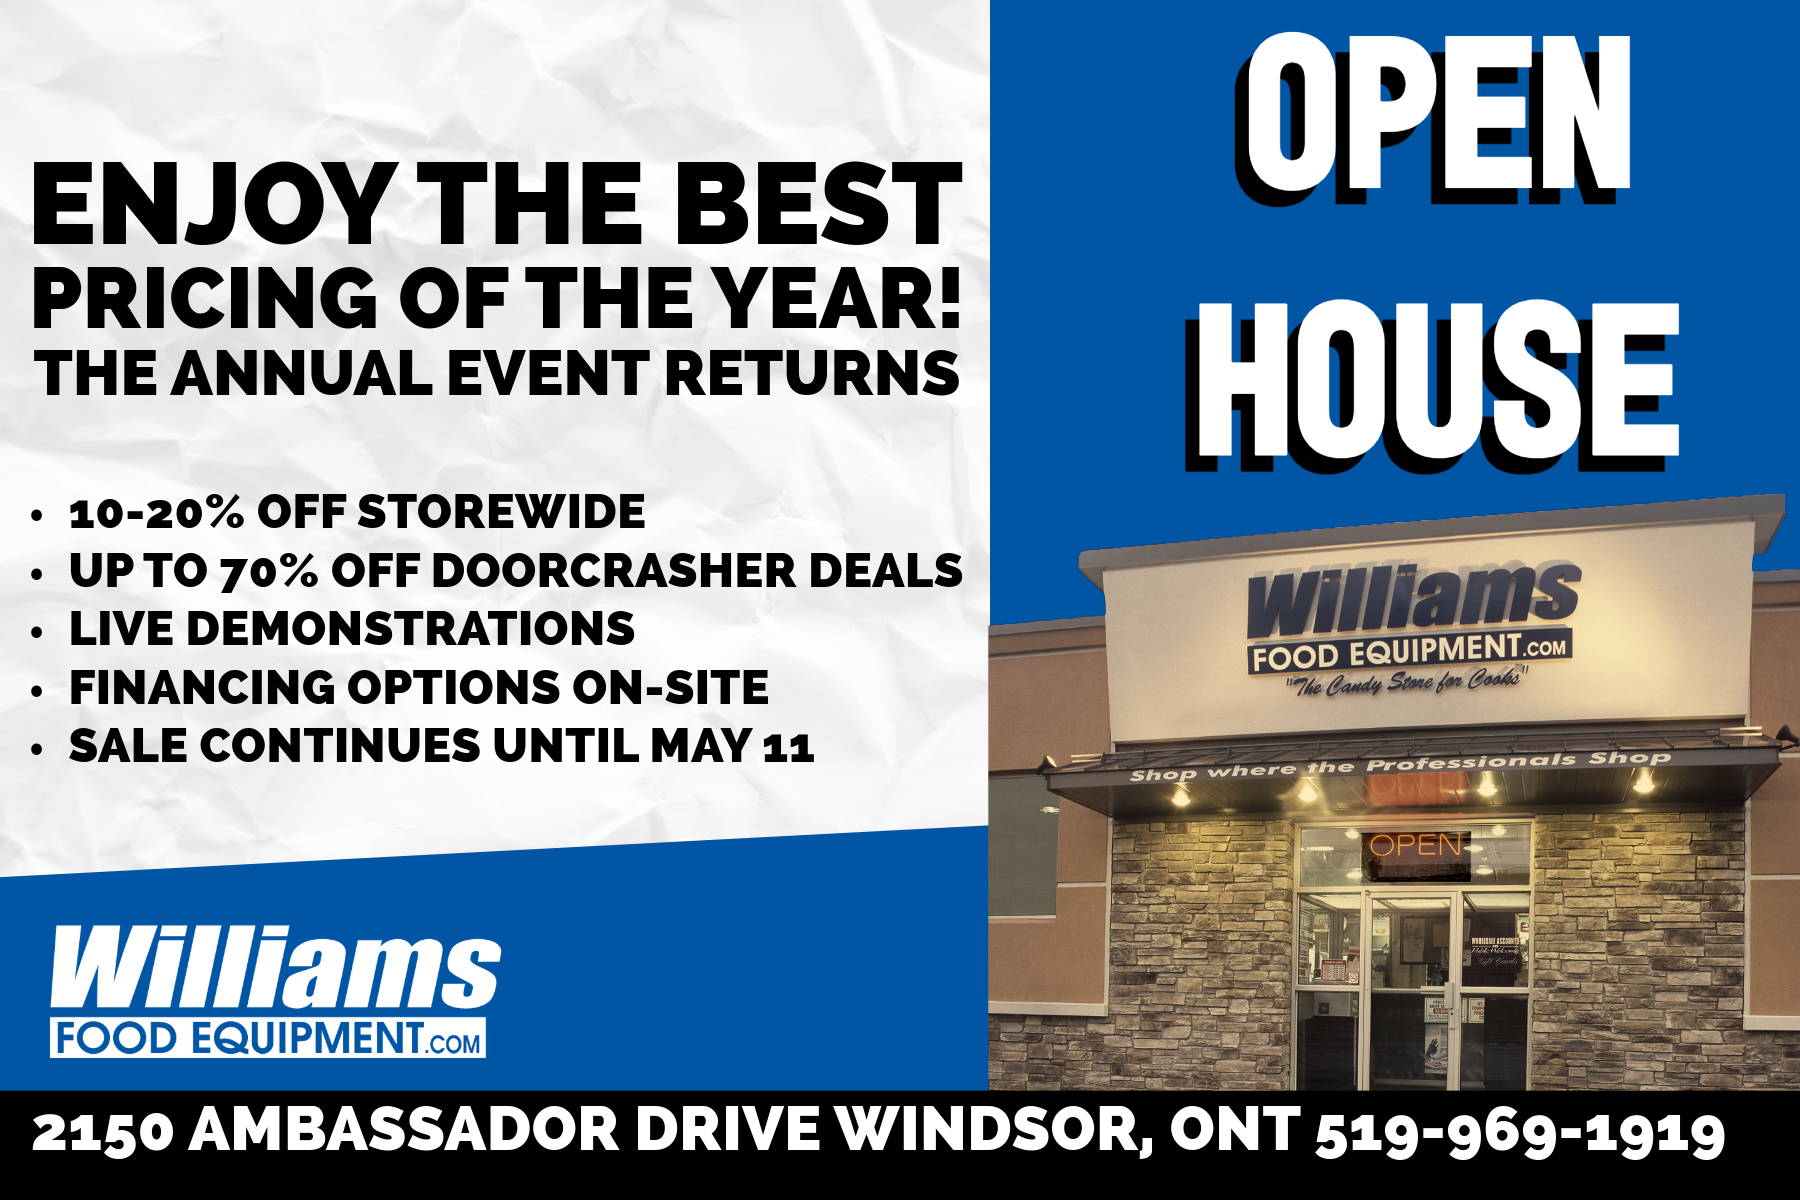 Open House, Event, Sale, Storewide, Best Price of Year